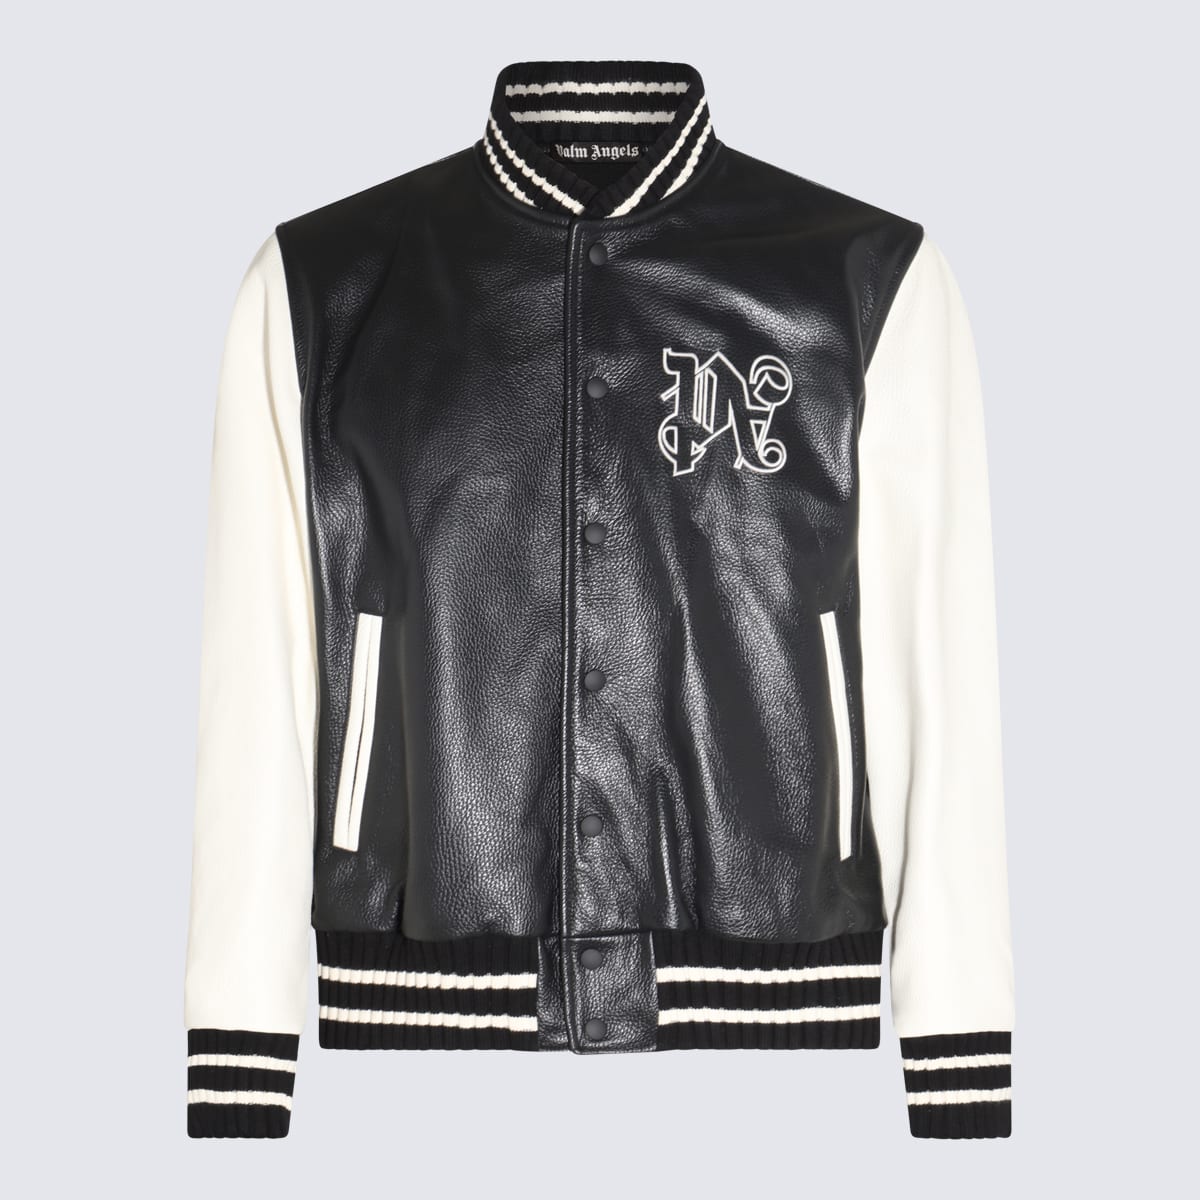 PALM ANGELS BLACK AND WHITE LEATHER JACKET